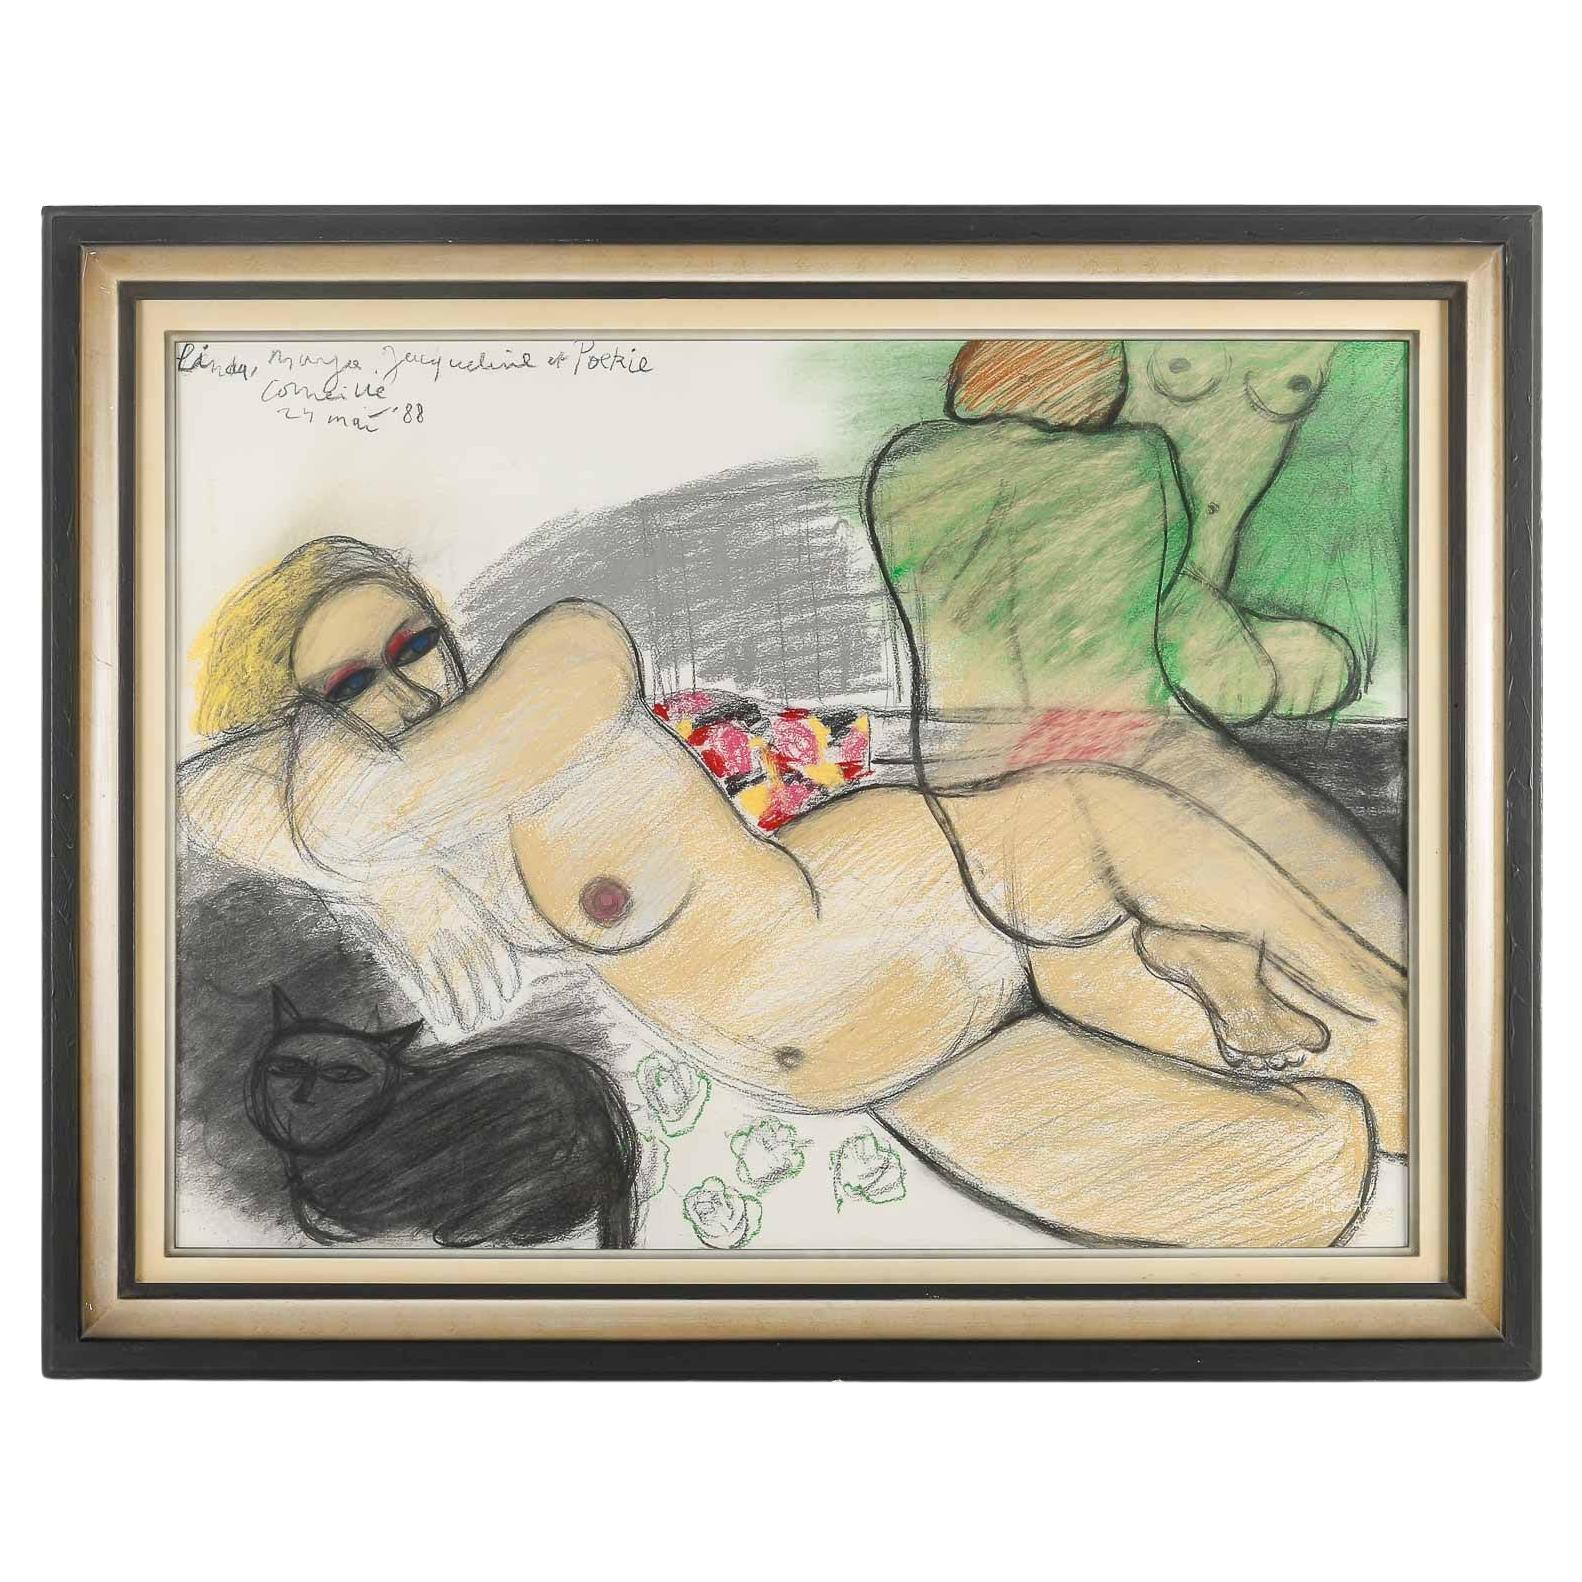 Framed Drawing by Corneille, 20th Century.